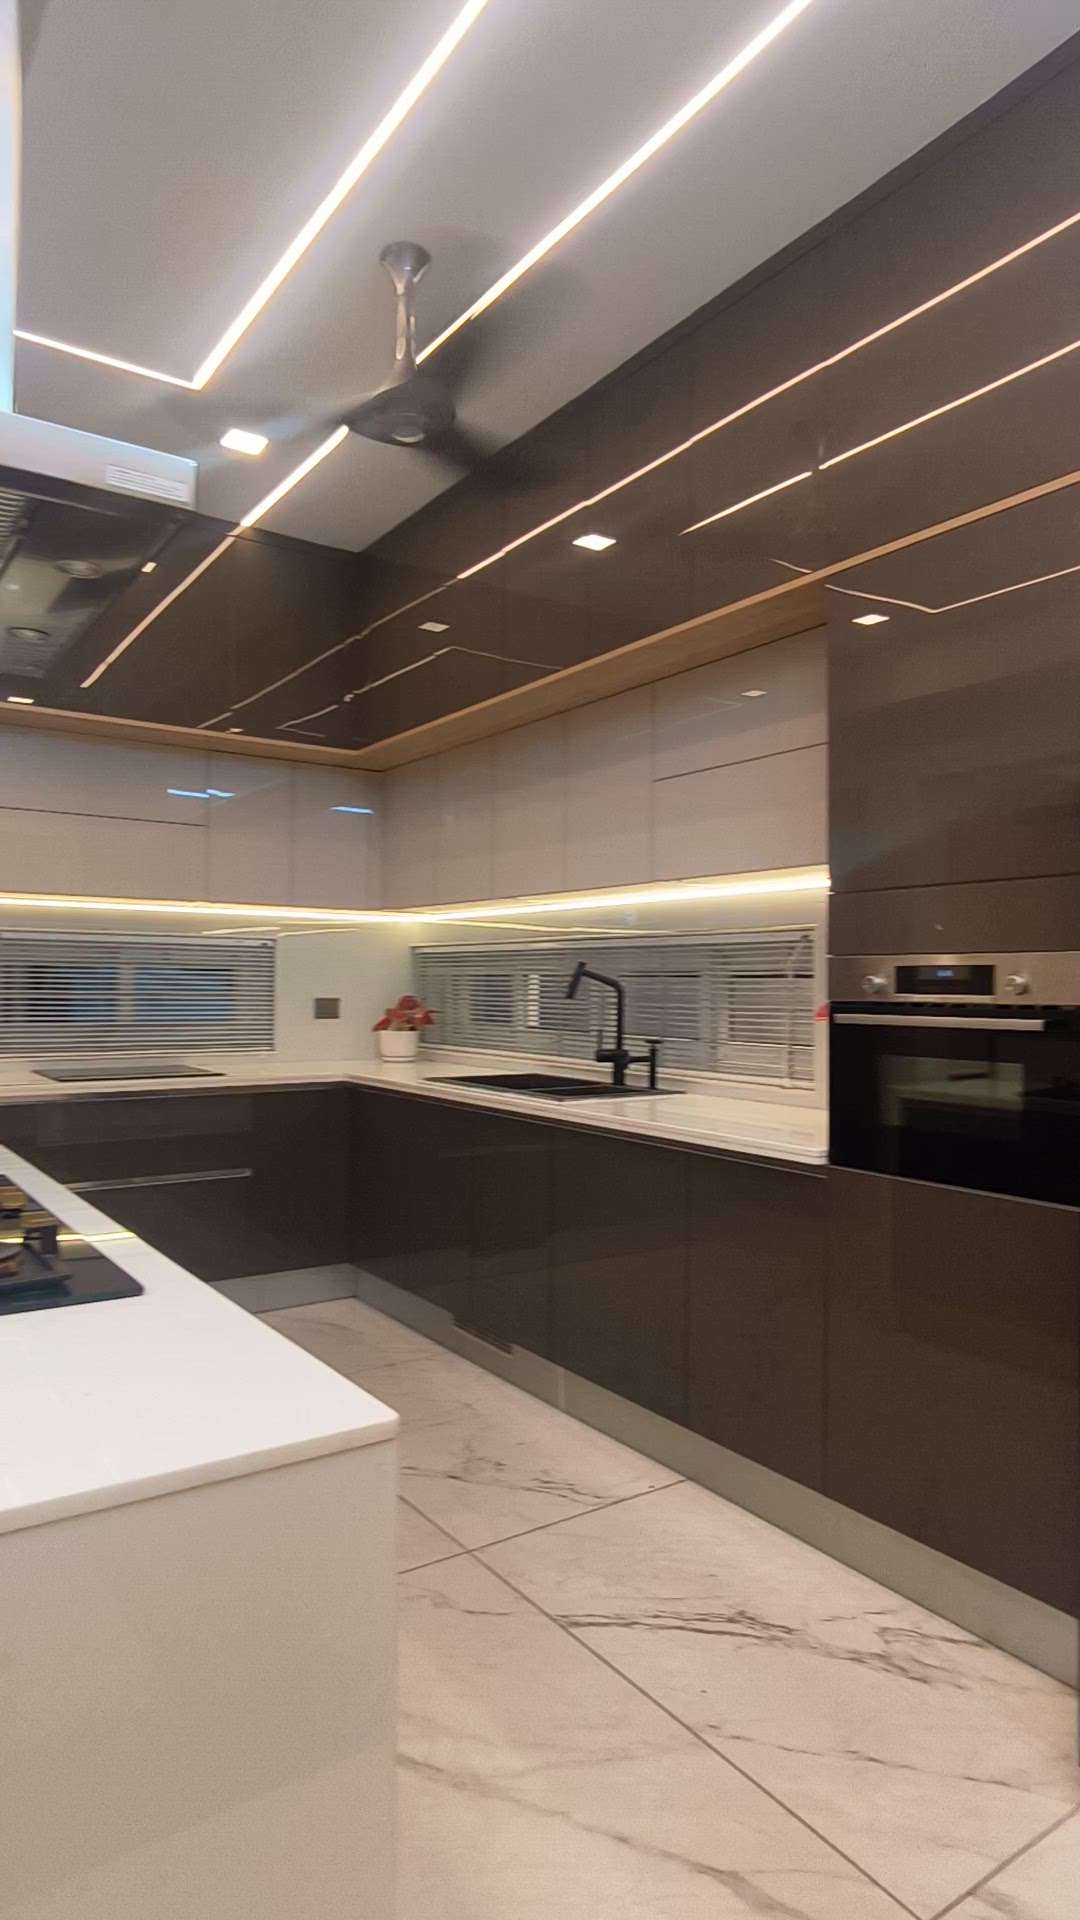 Completed Project at Anayadi
Modern Kitchen with glass cabinets #completed_house_project #islandchimney #islandkitchen #modernkitchen #ModularKitchen #LUXURY_INTERIOR #luxurykitchen